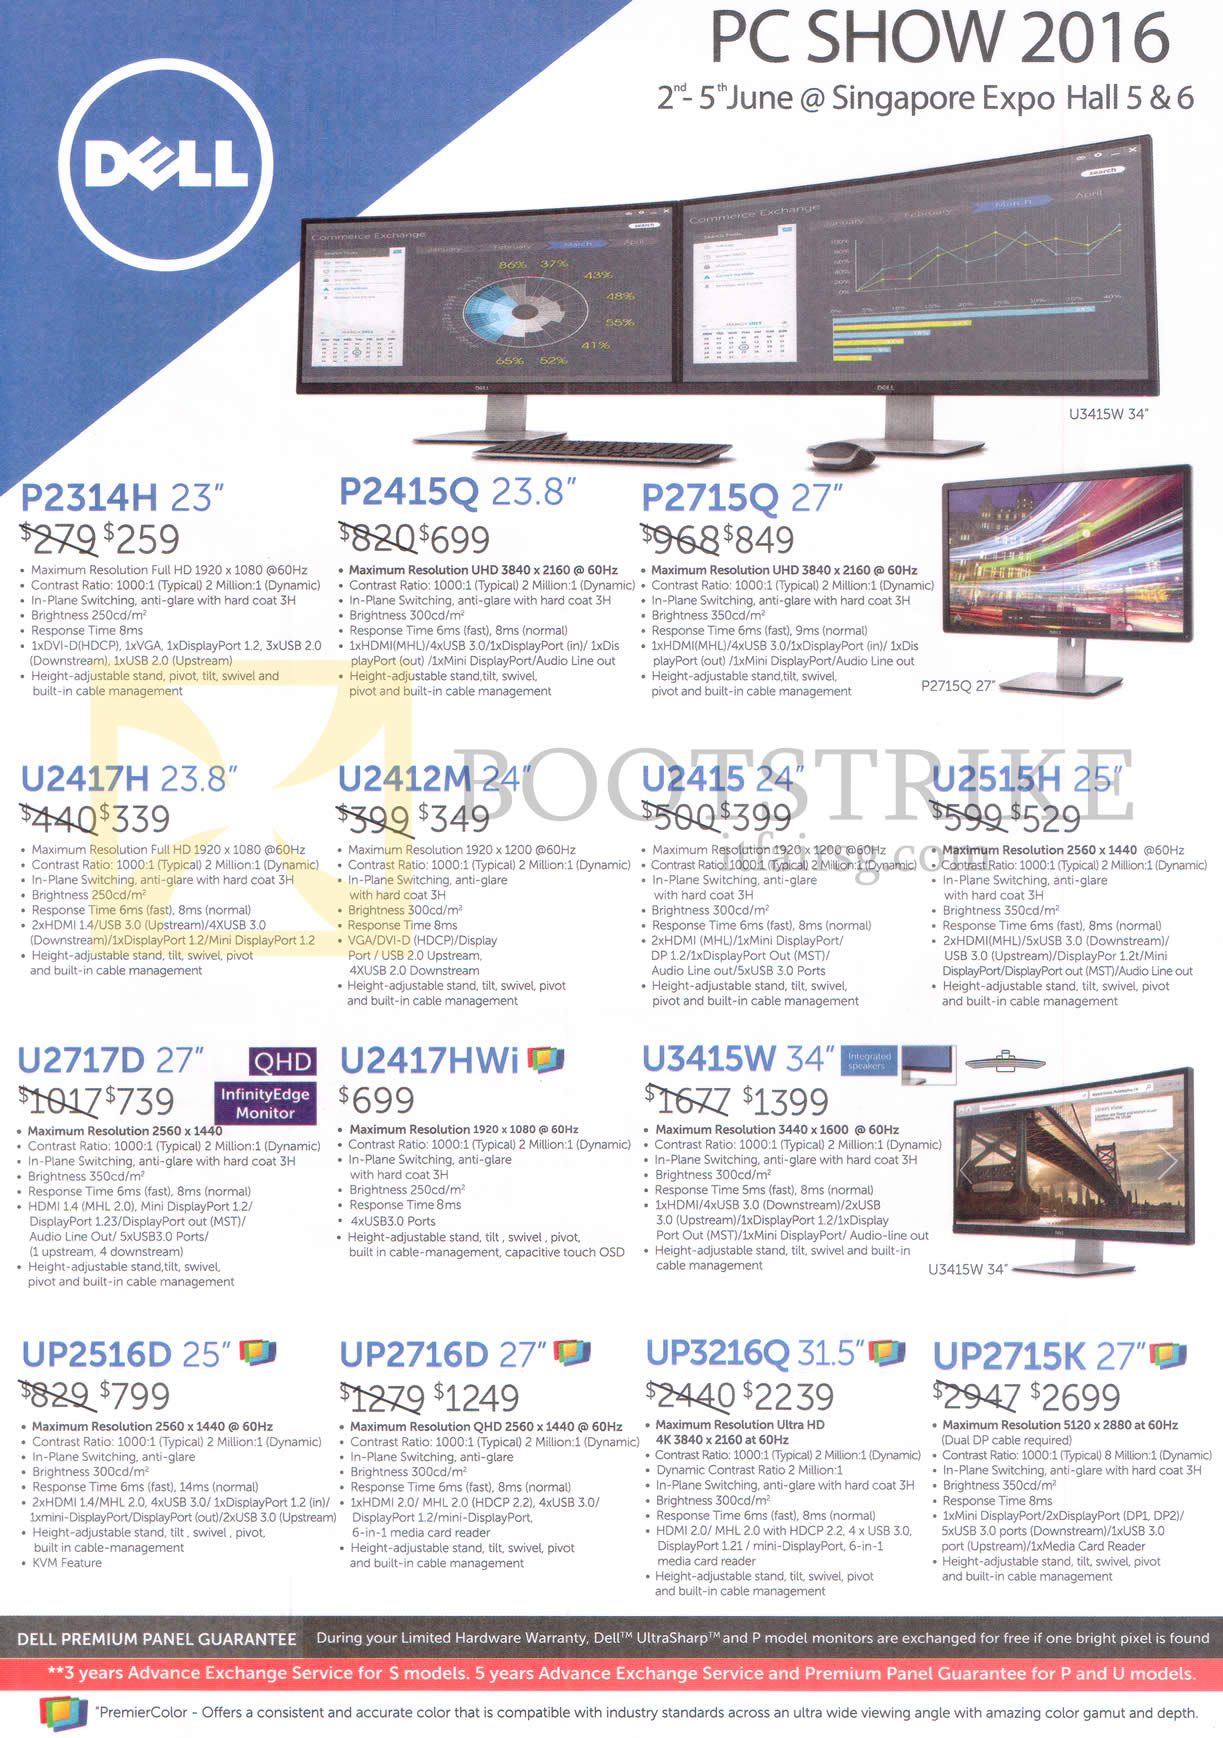 PC SHOW 2016 price list image brochure of Dell Monitors IPS P2314H, 2415Q, 2715Q, U2417H, 2412M, 2415, 2515H, 2717D, 2417HWi, 3415W, UP2516D, 2716D, 3216D, 2715K